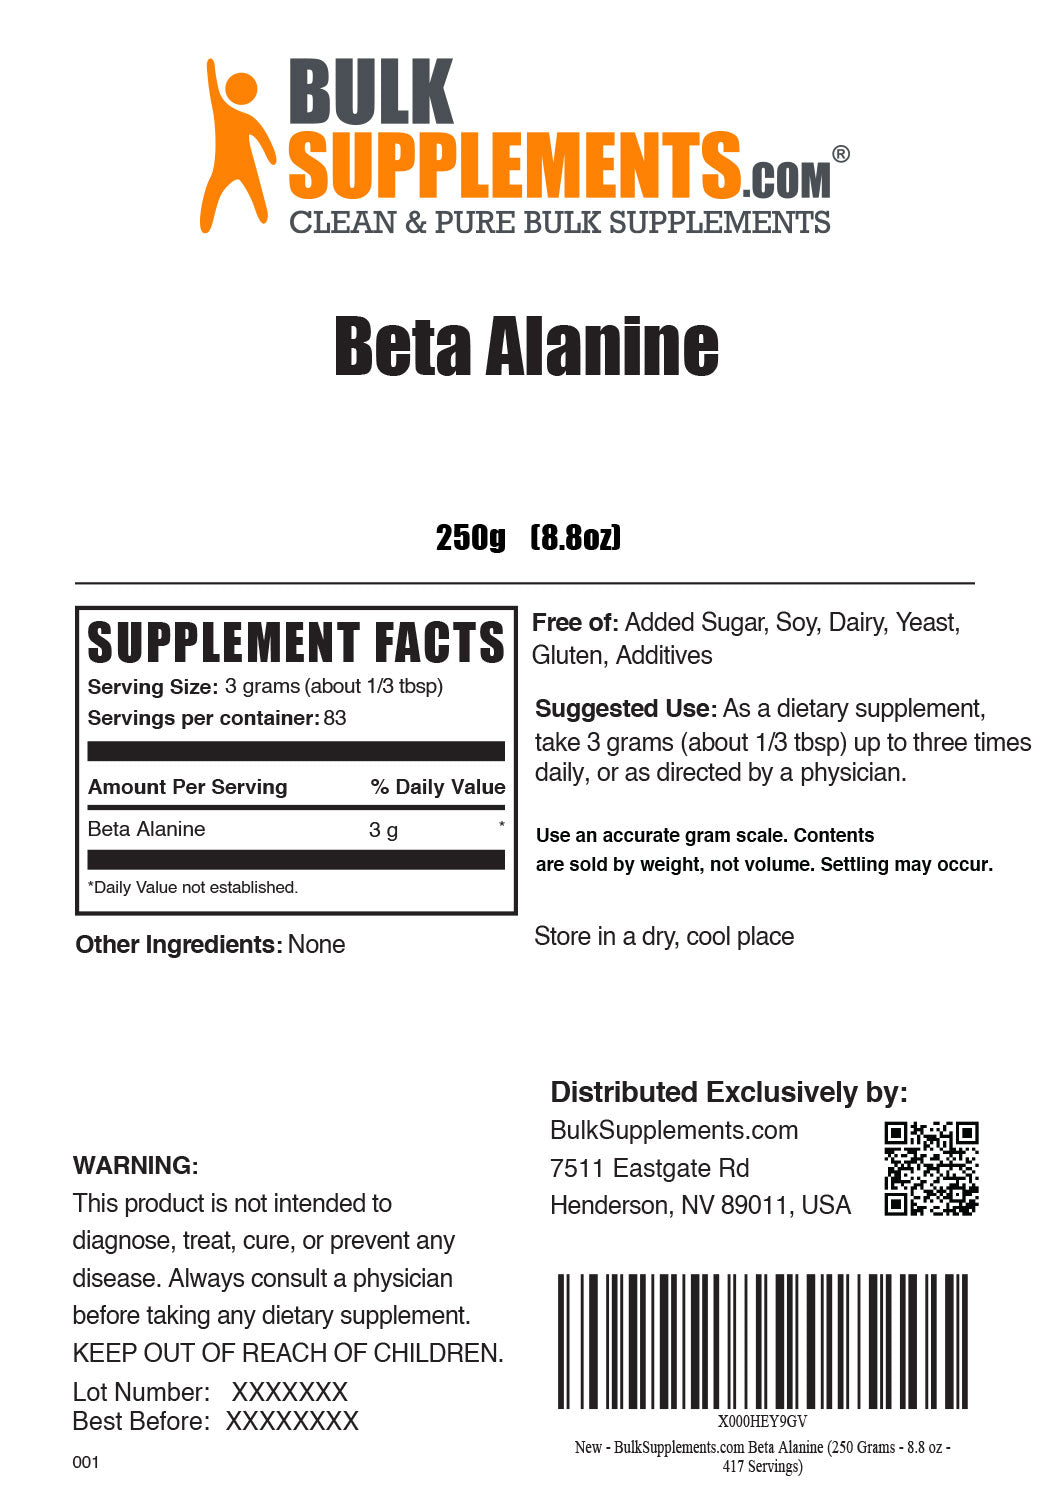 Beta Alanine Supplement Facts for 250g bag